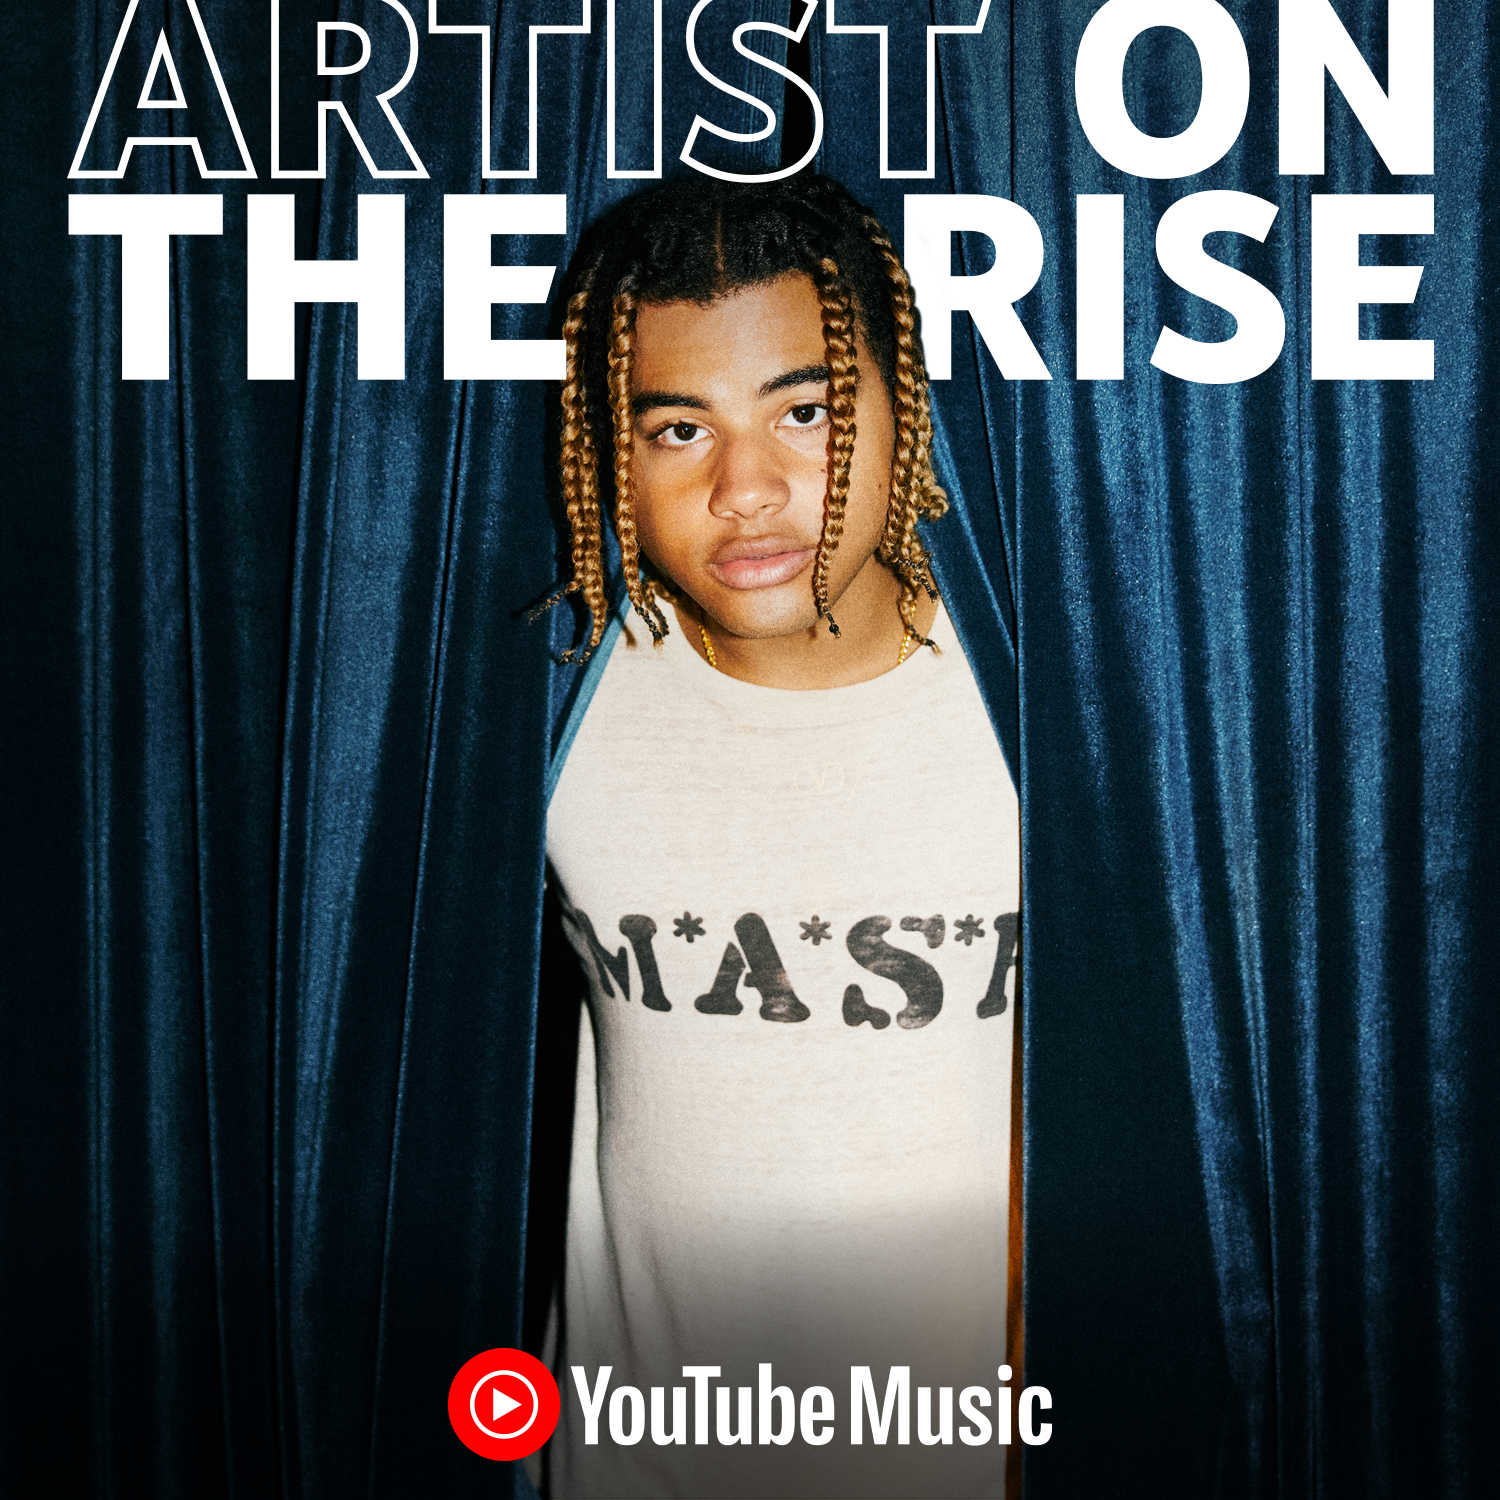 YouTube Music debuts 24kGoldn's Artist on the Rise documentary